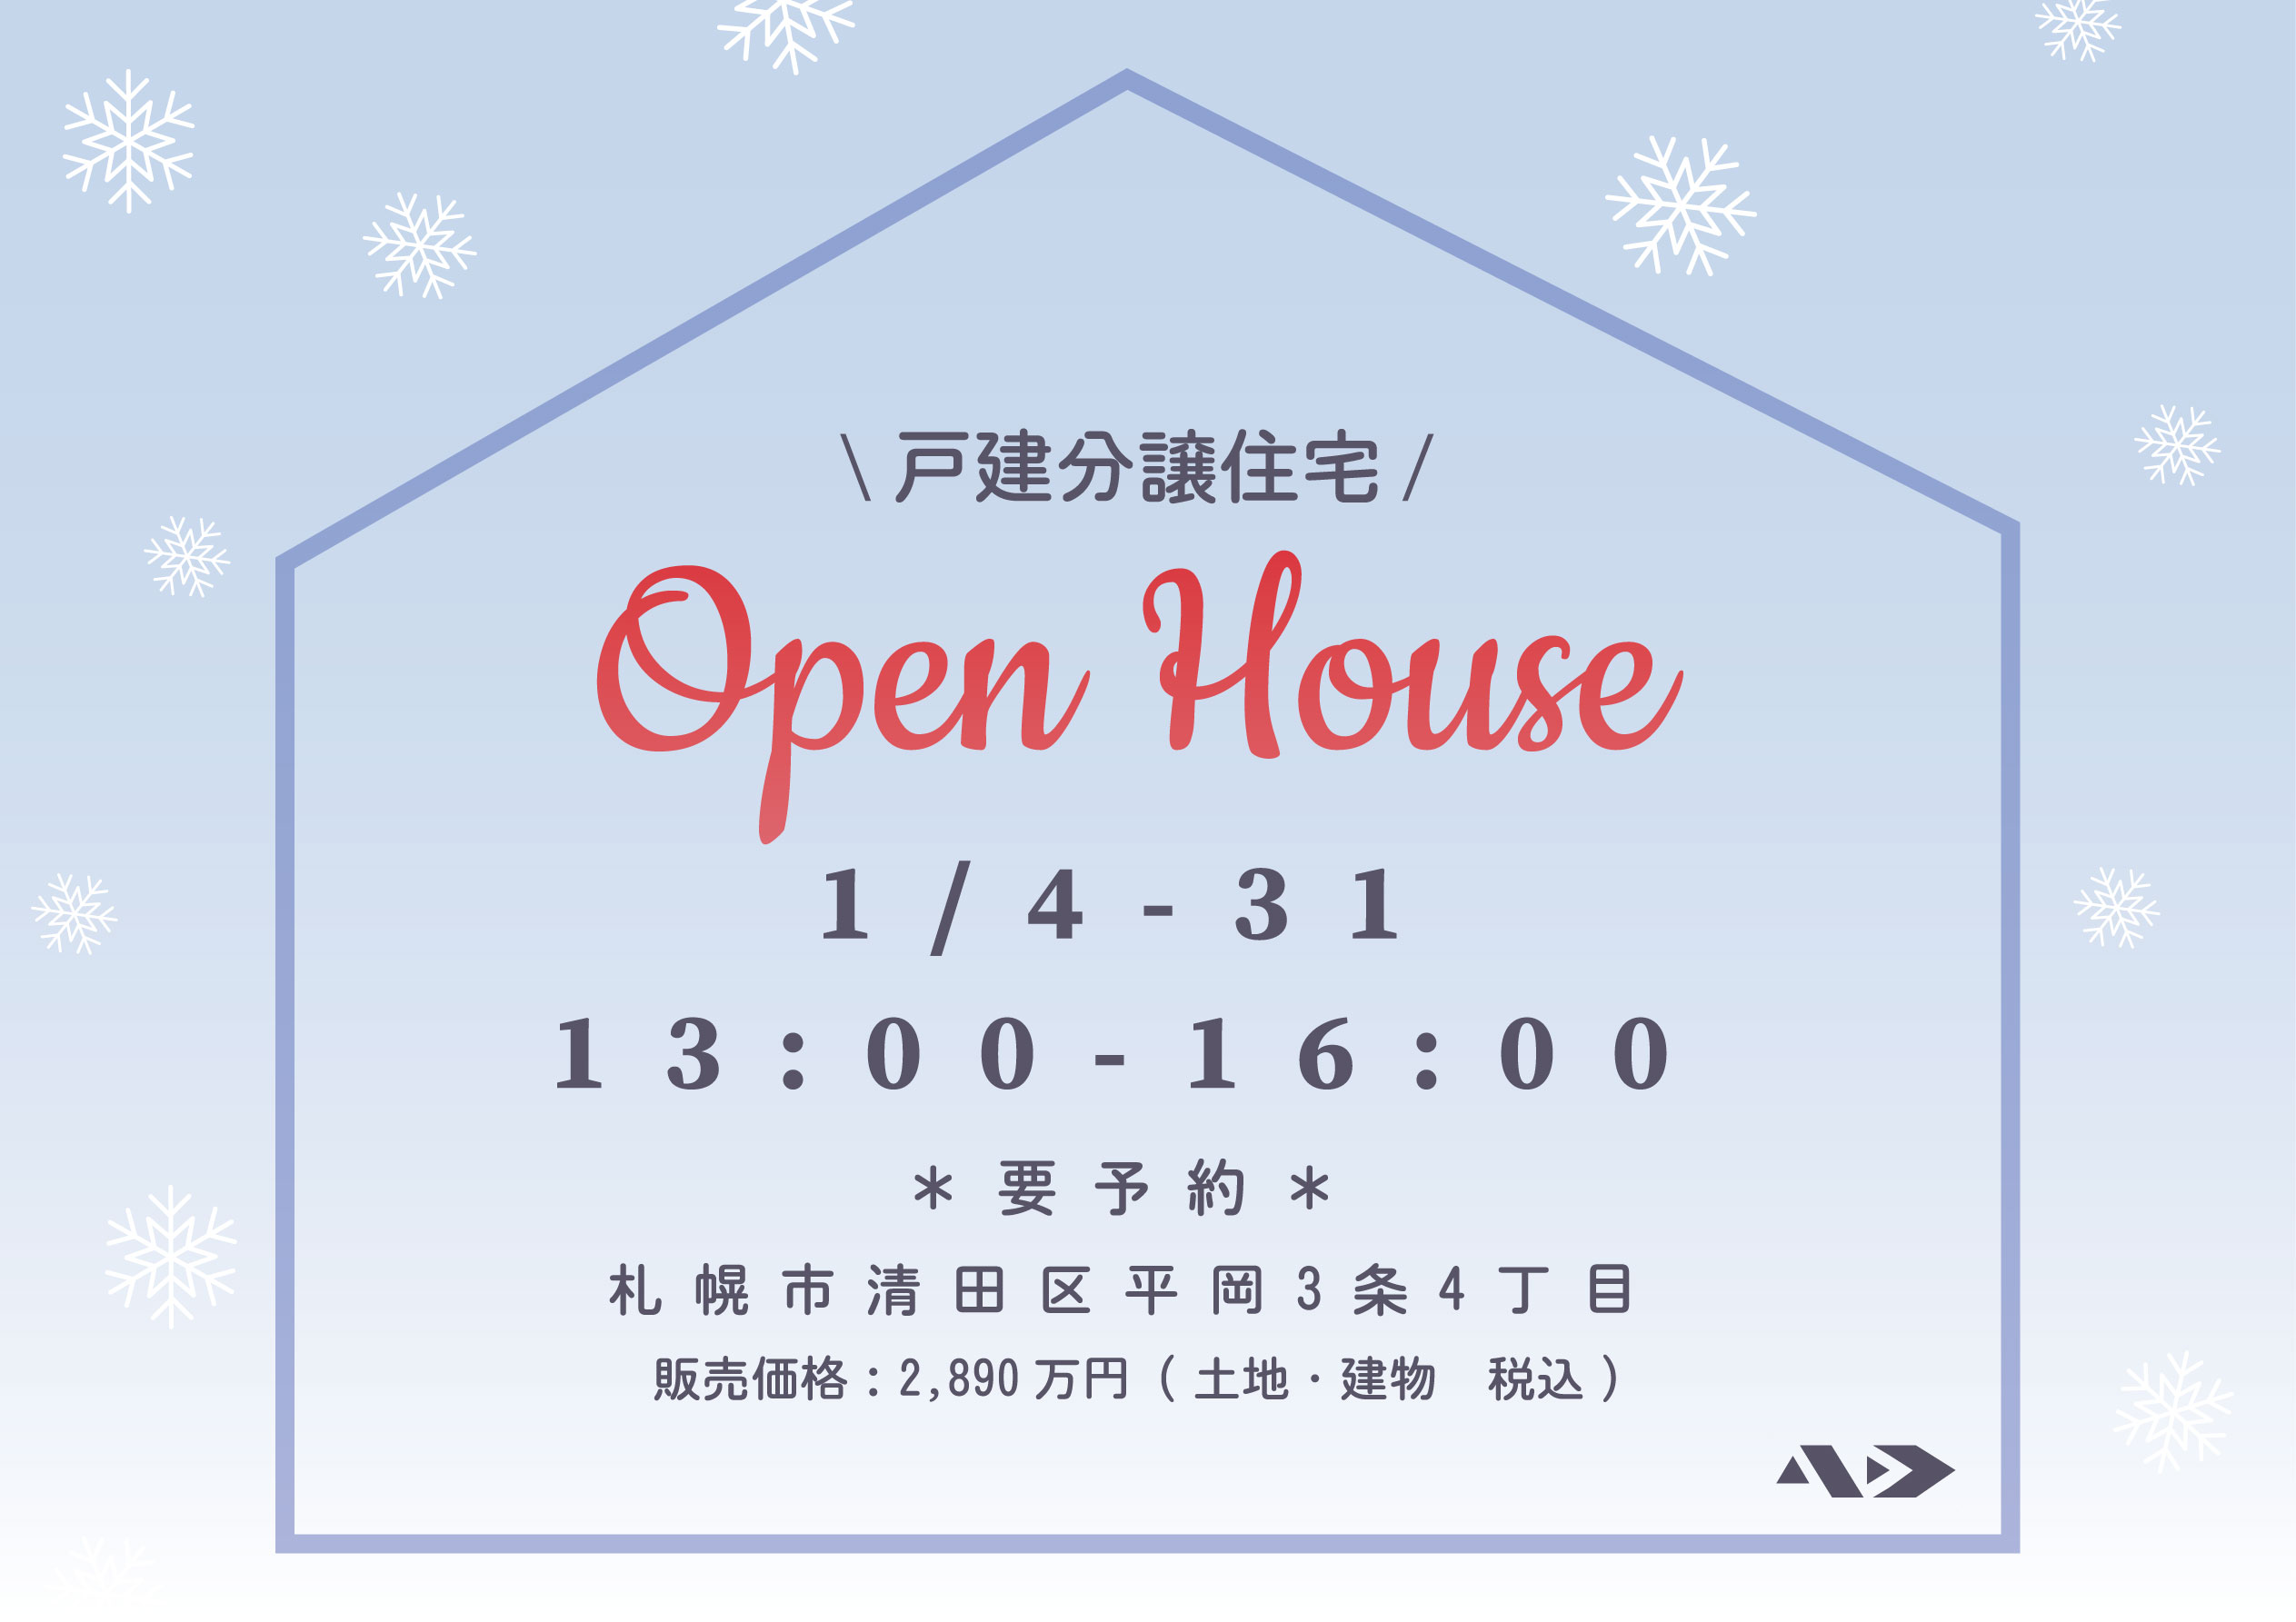 OPEN HOUSE at 清田区平岡3条4丁目